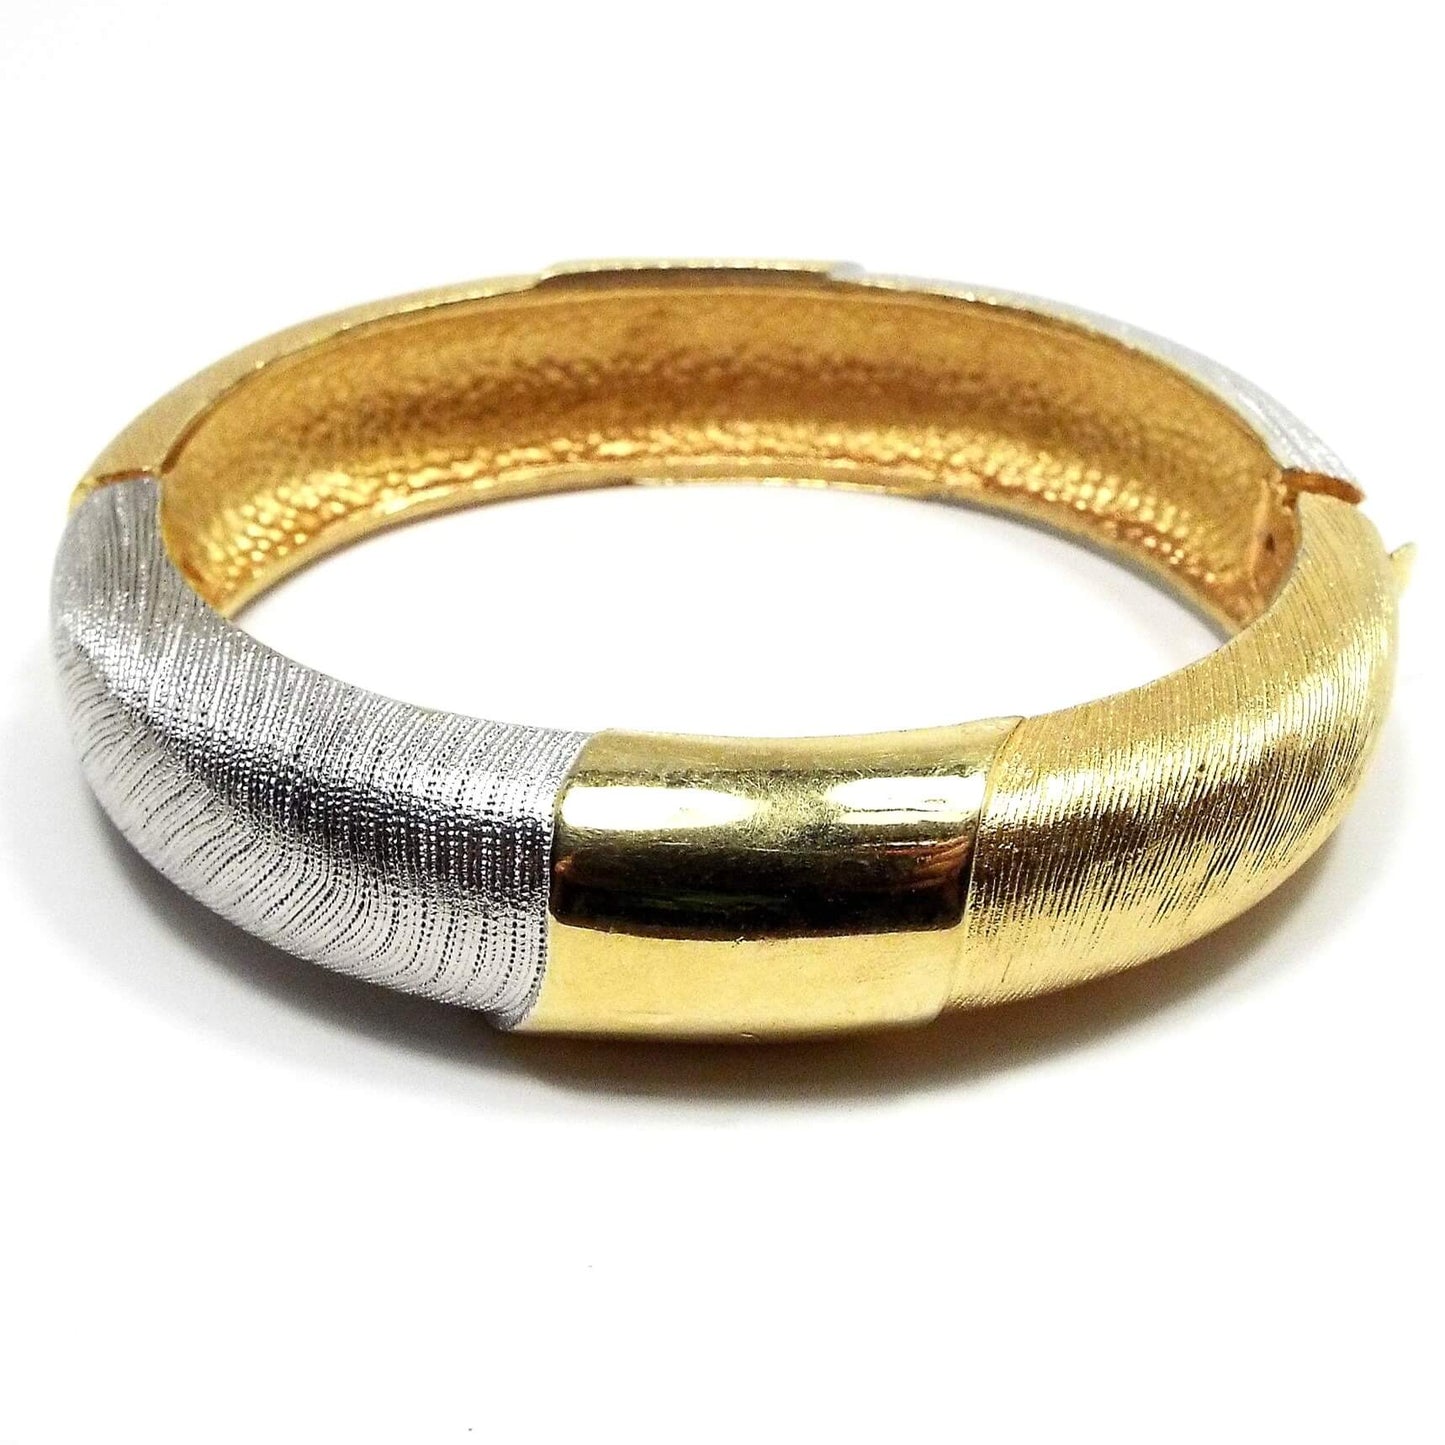 Angled side view of the retro vintage hinged bangle bracelet. It is two tone in color with gold tone and silver tone color metal. Most of the bangle has a textured line design on it. There is a locking hinge clasp at the side.